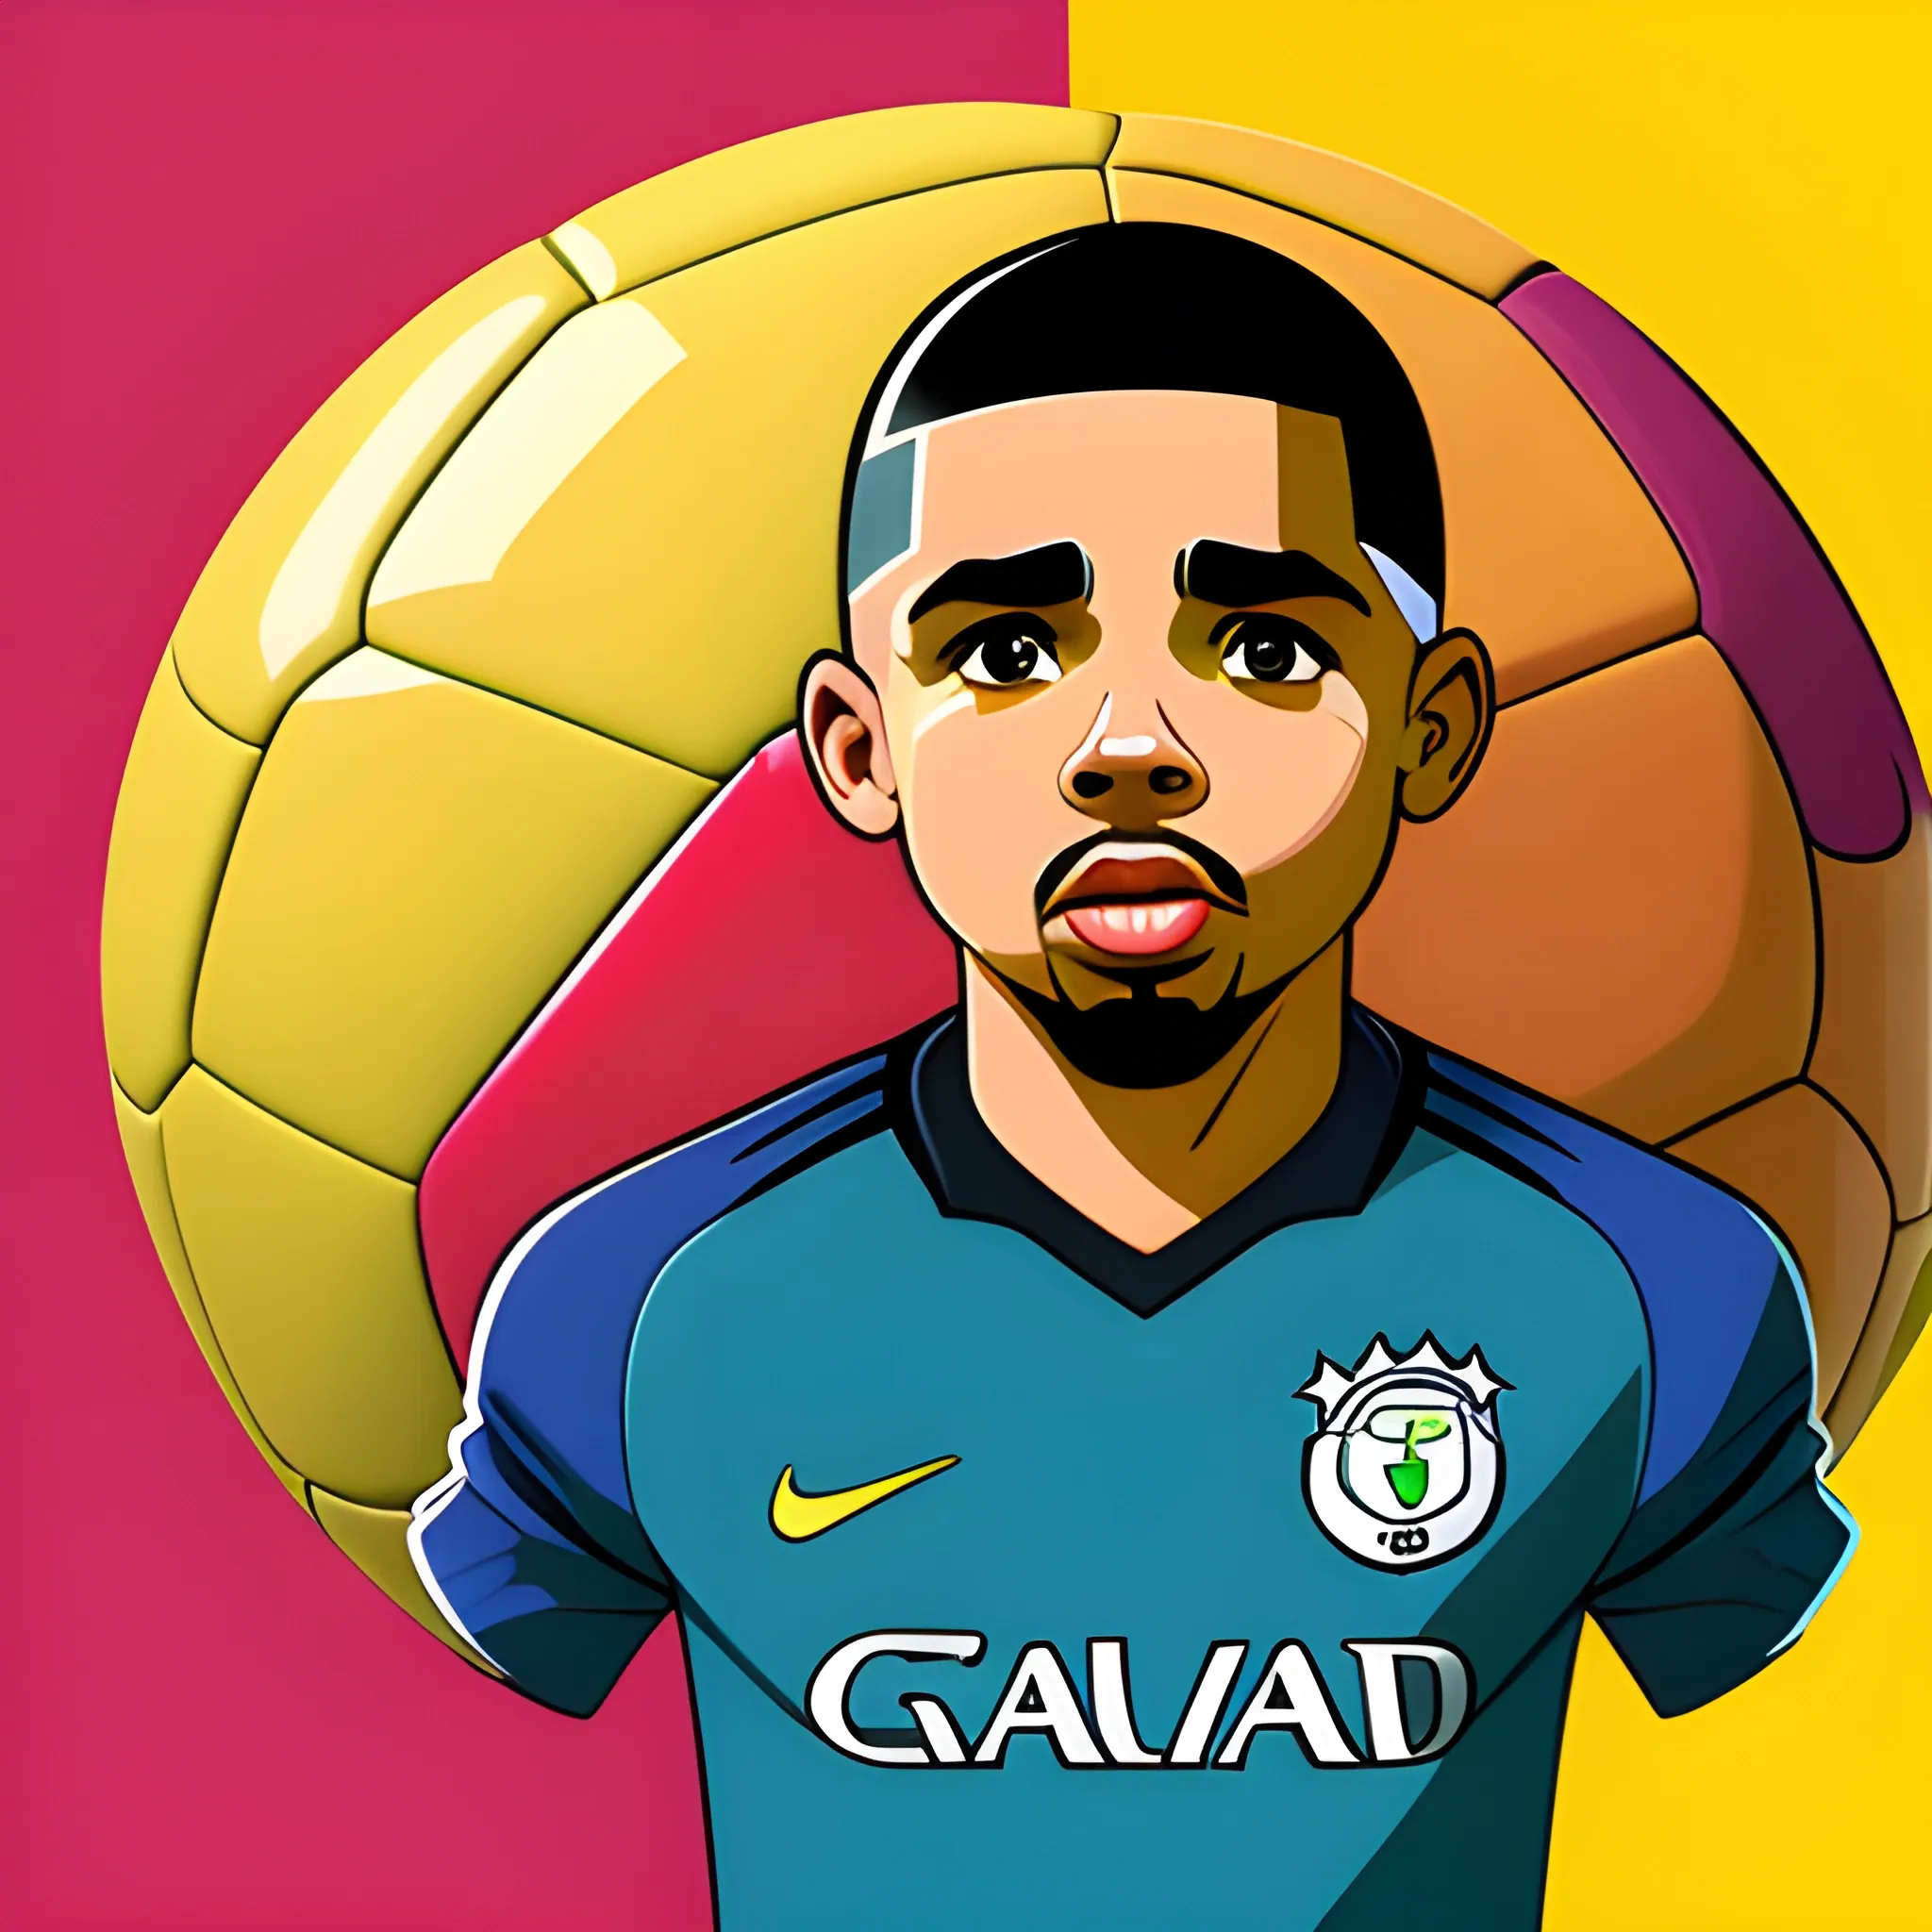 Character, soccer ballon, Gabriel Jesus face. Toon style